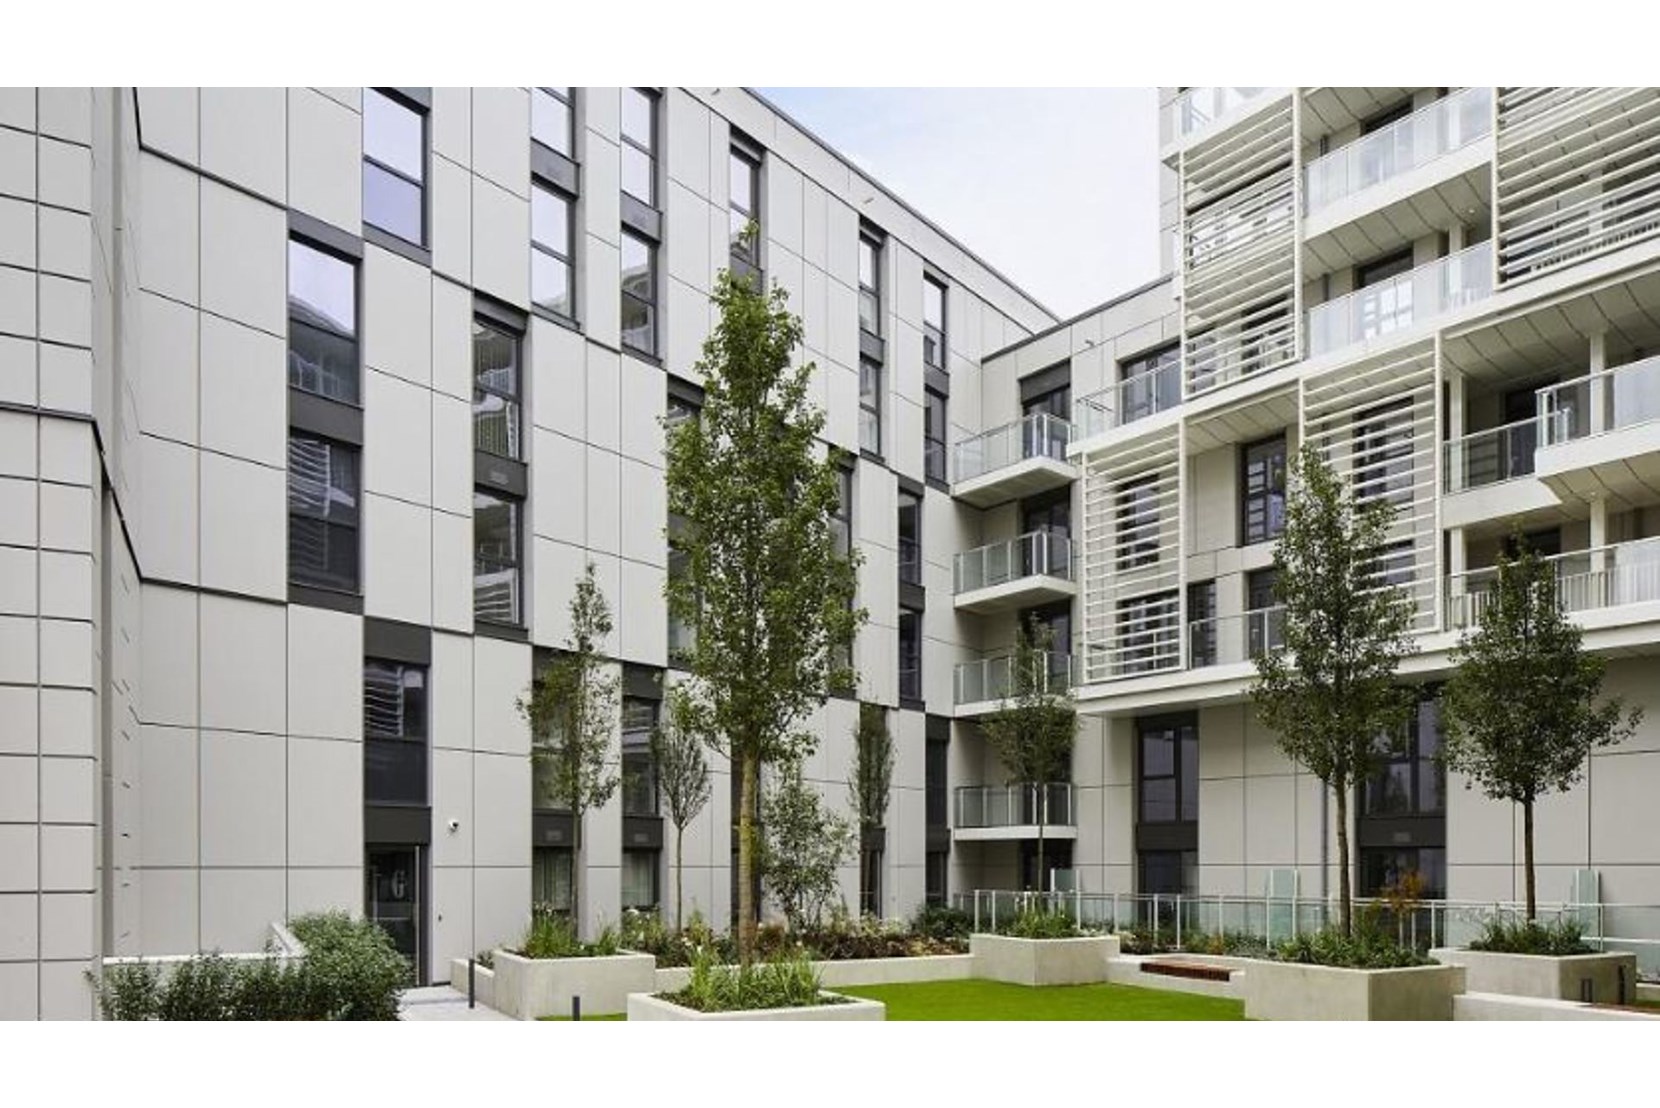 Apartments to Rent by Savills at The Highline, Tower Hamlets, E14, communal gardens